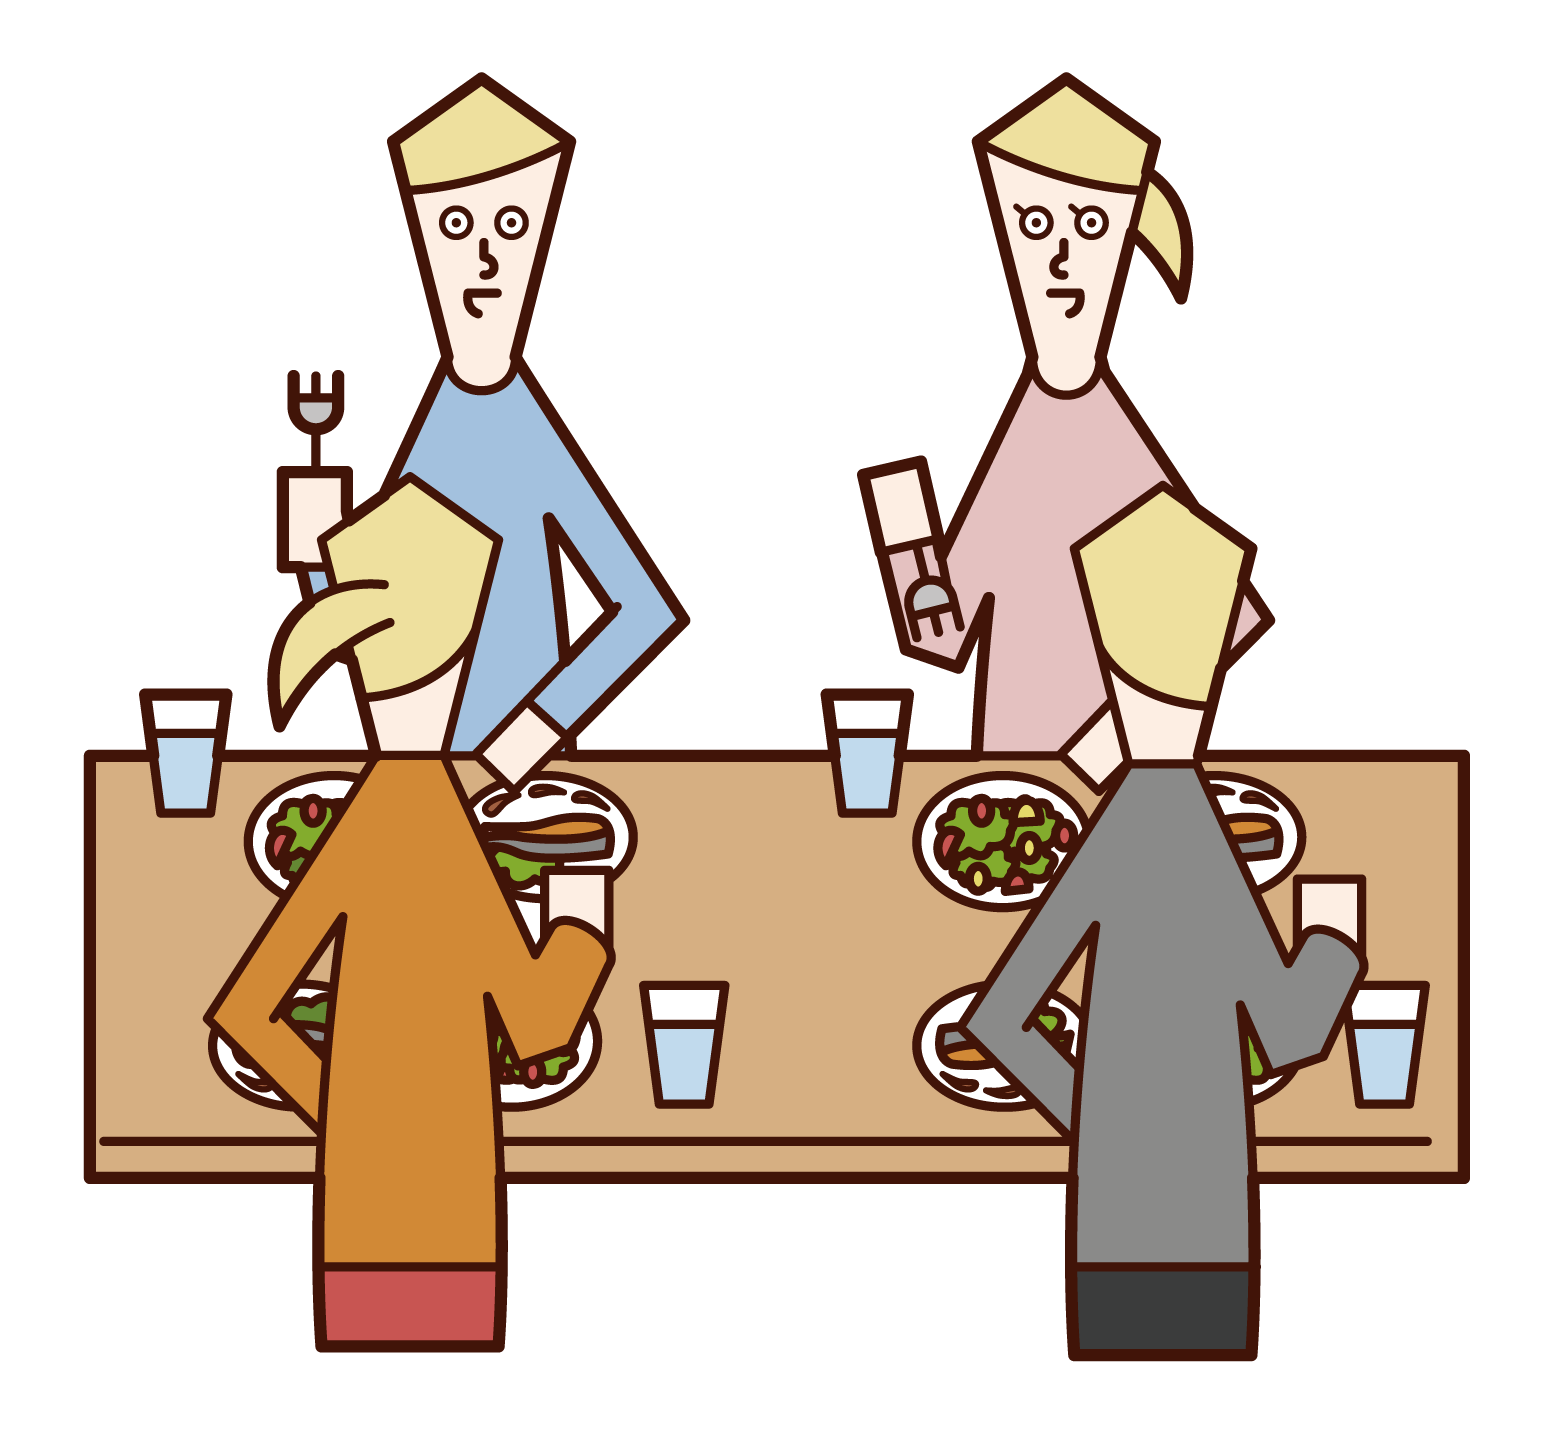 Illustrations of people (men and women) enjoying lunch